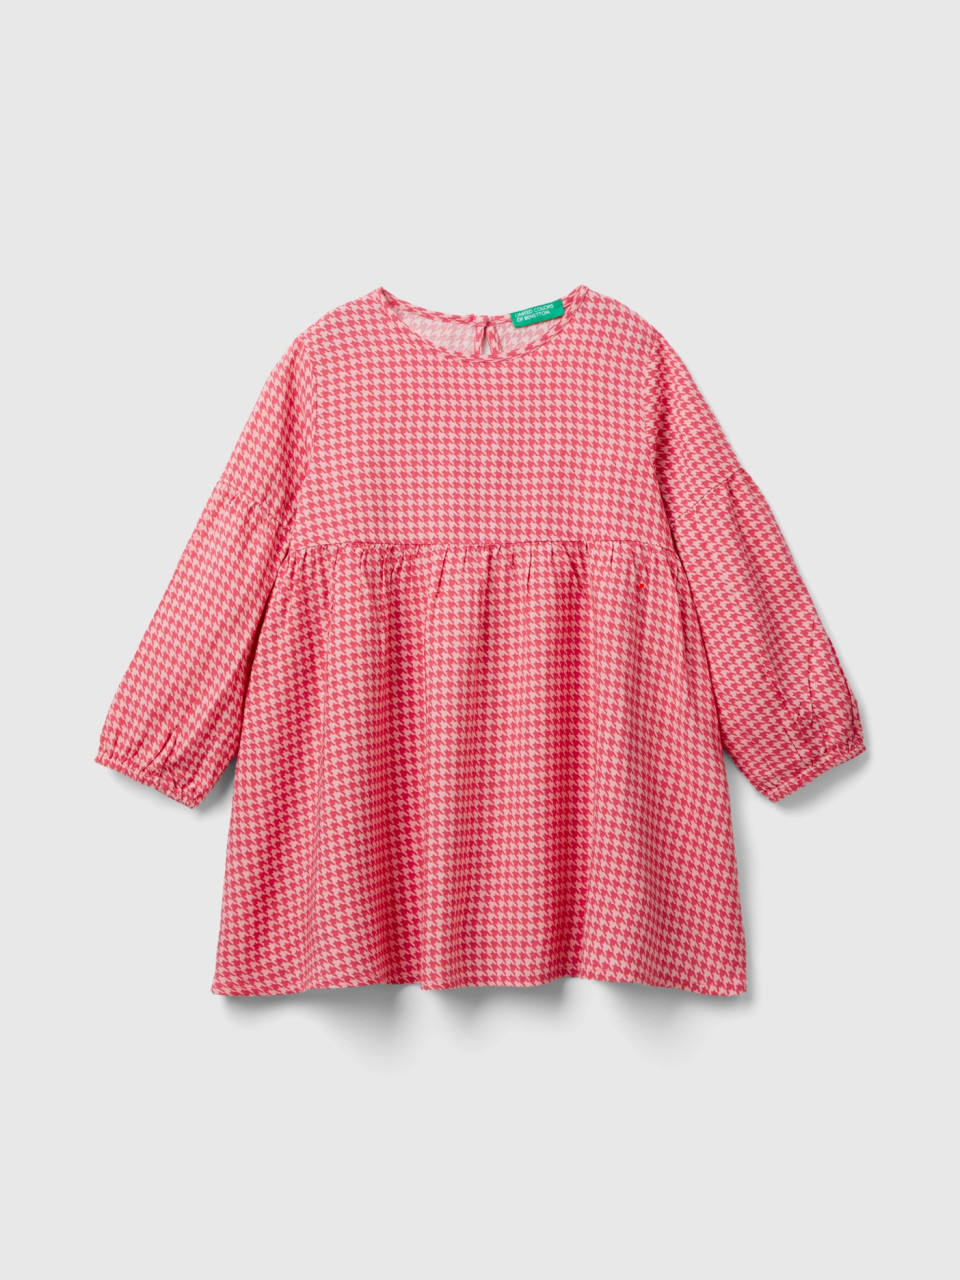 Benetton, Houndstooth Dress In Sustainable Viscose, Pink, Kids